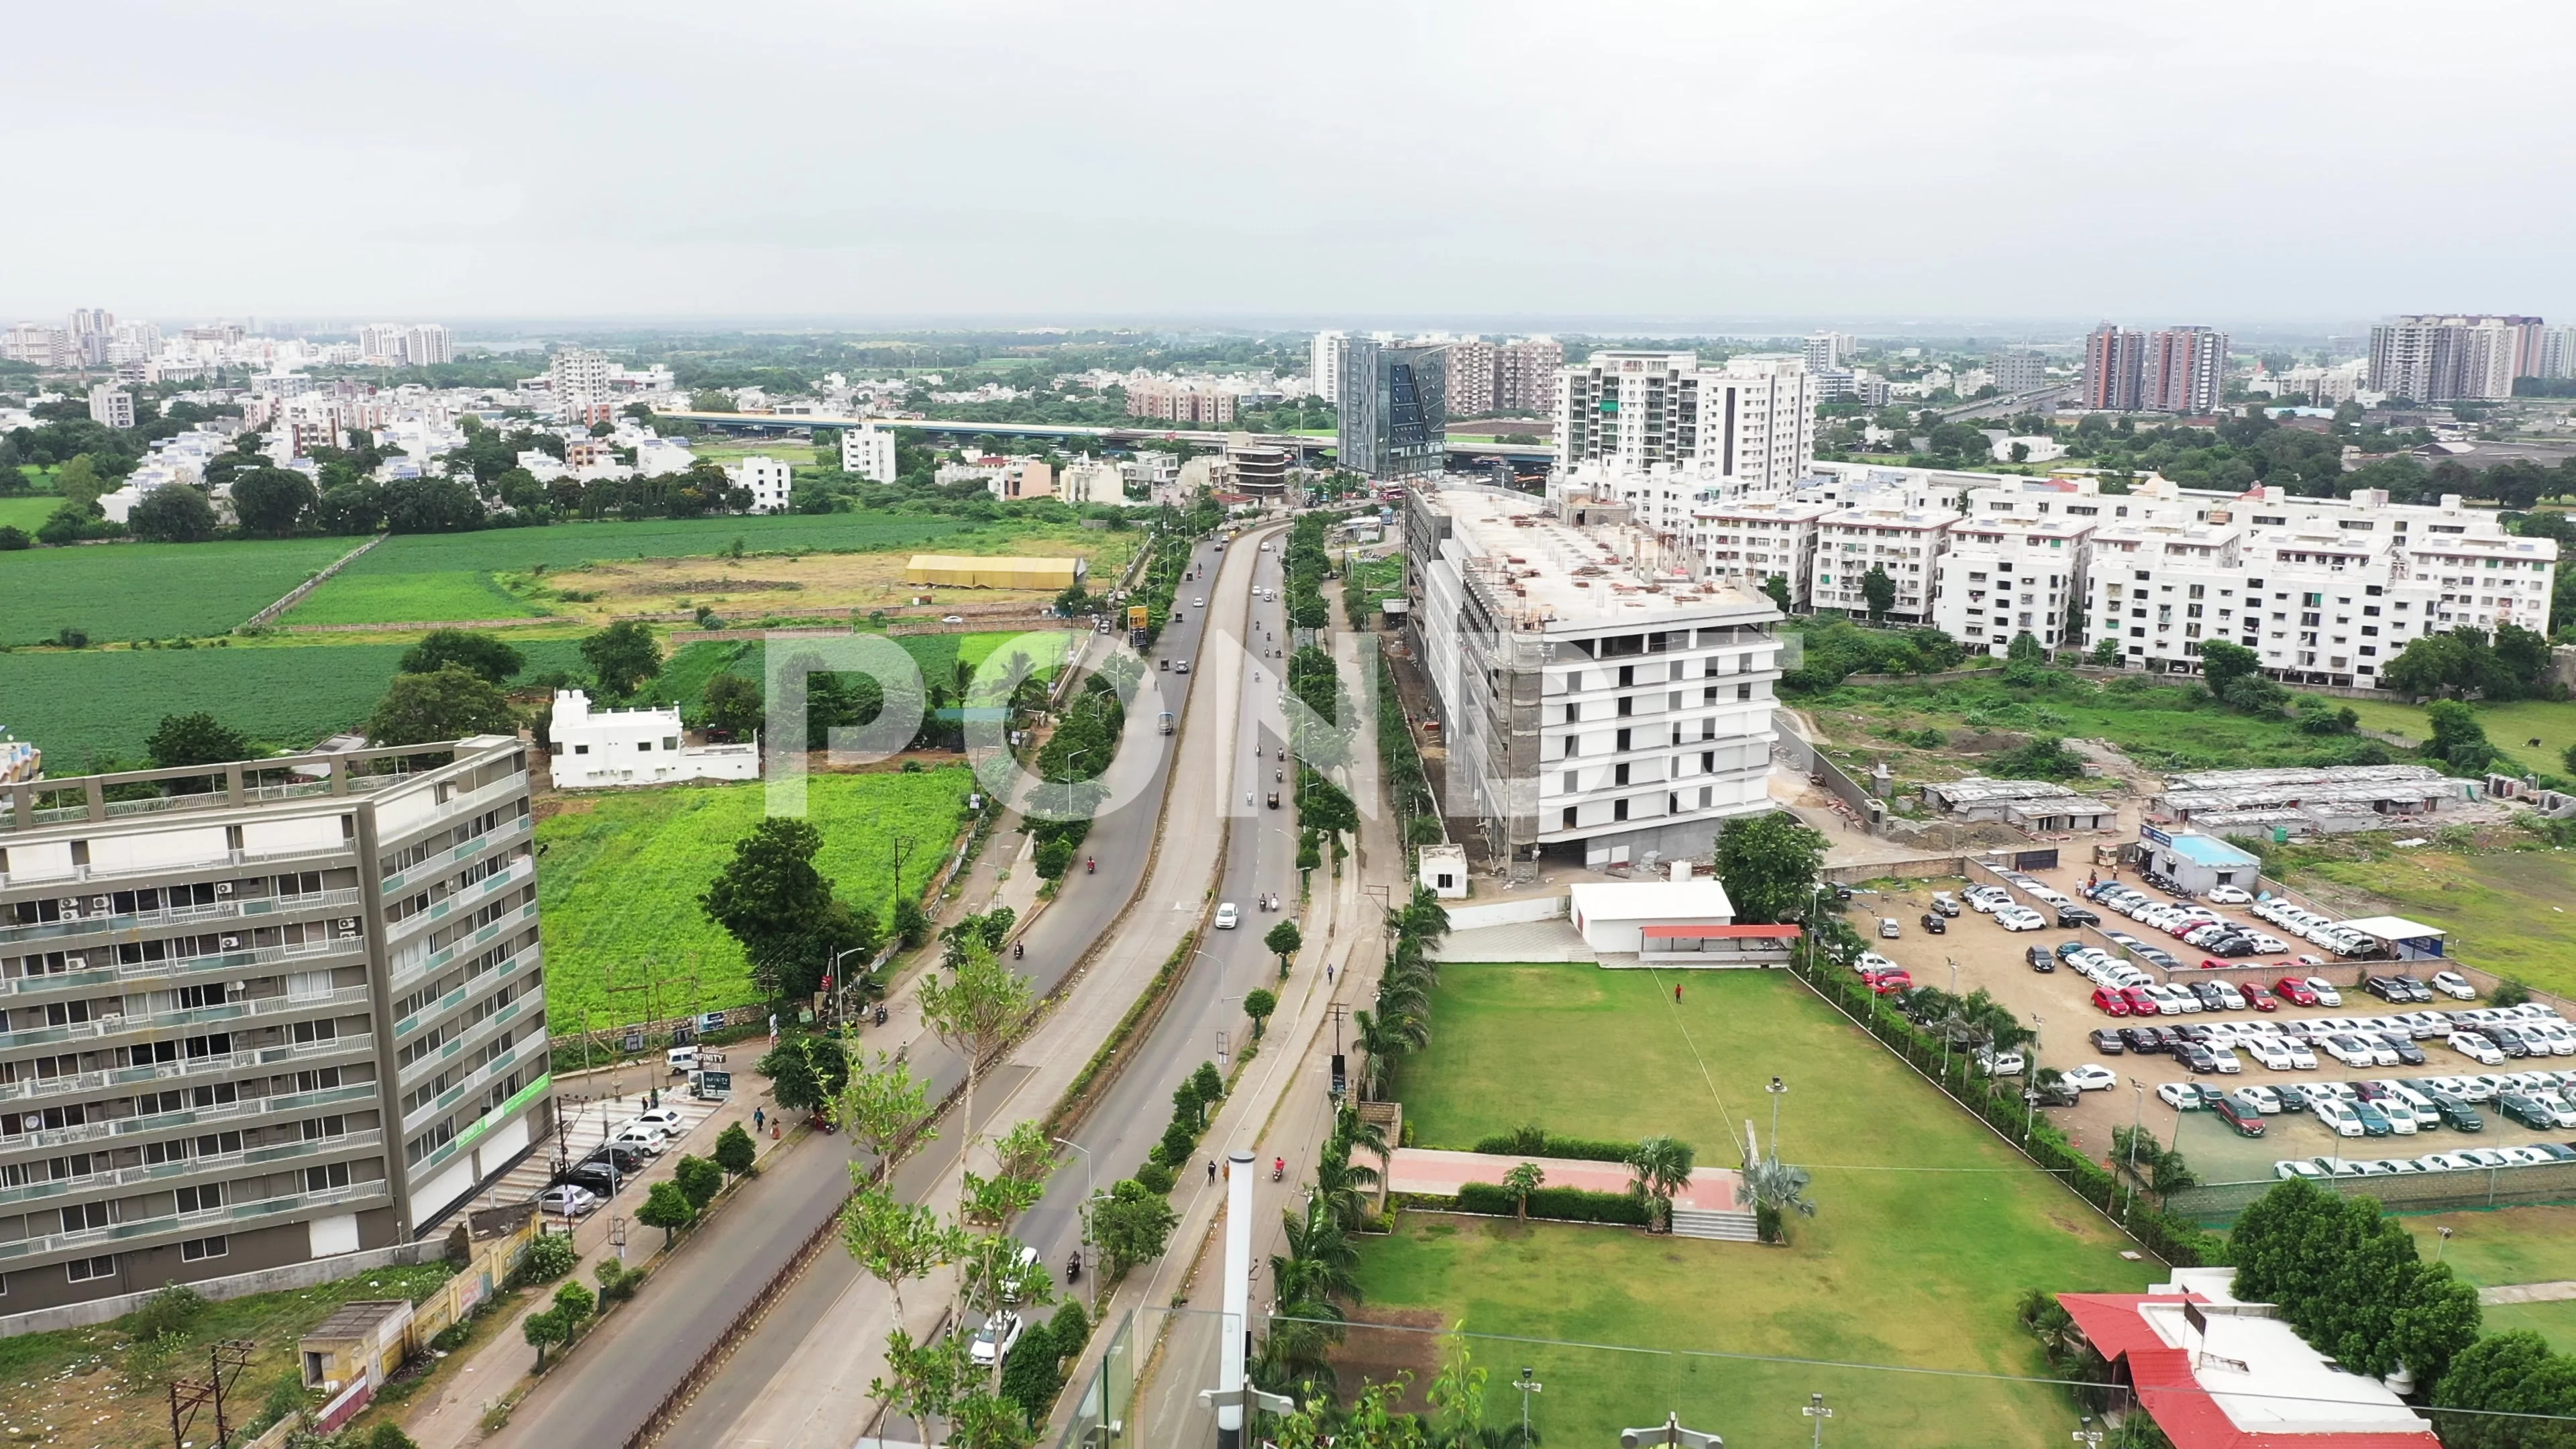 150 Feet Ring Road, Rajkot: Map, Property Rates, Projects, Photos, Reviews,  Info